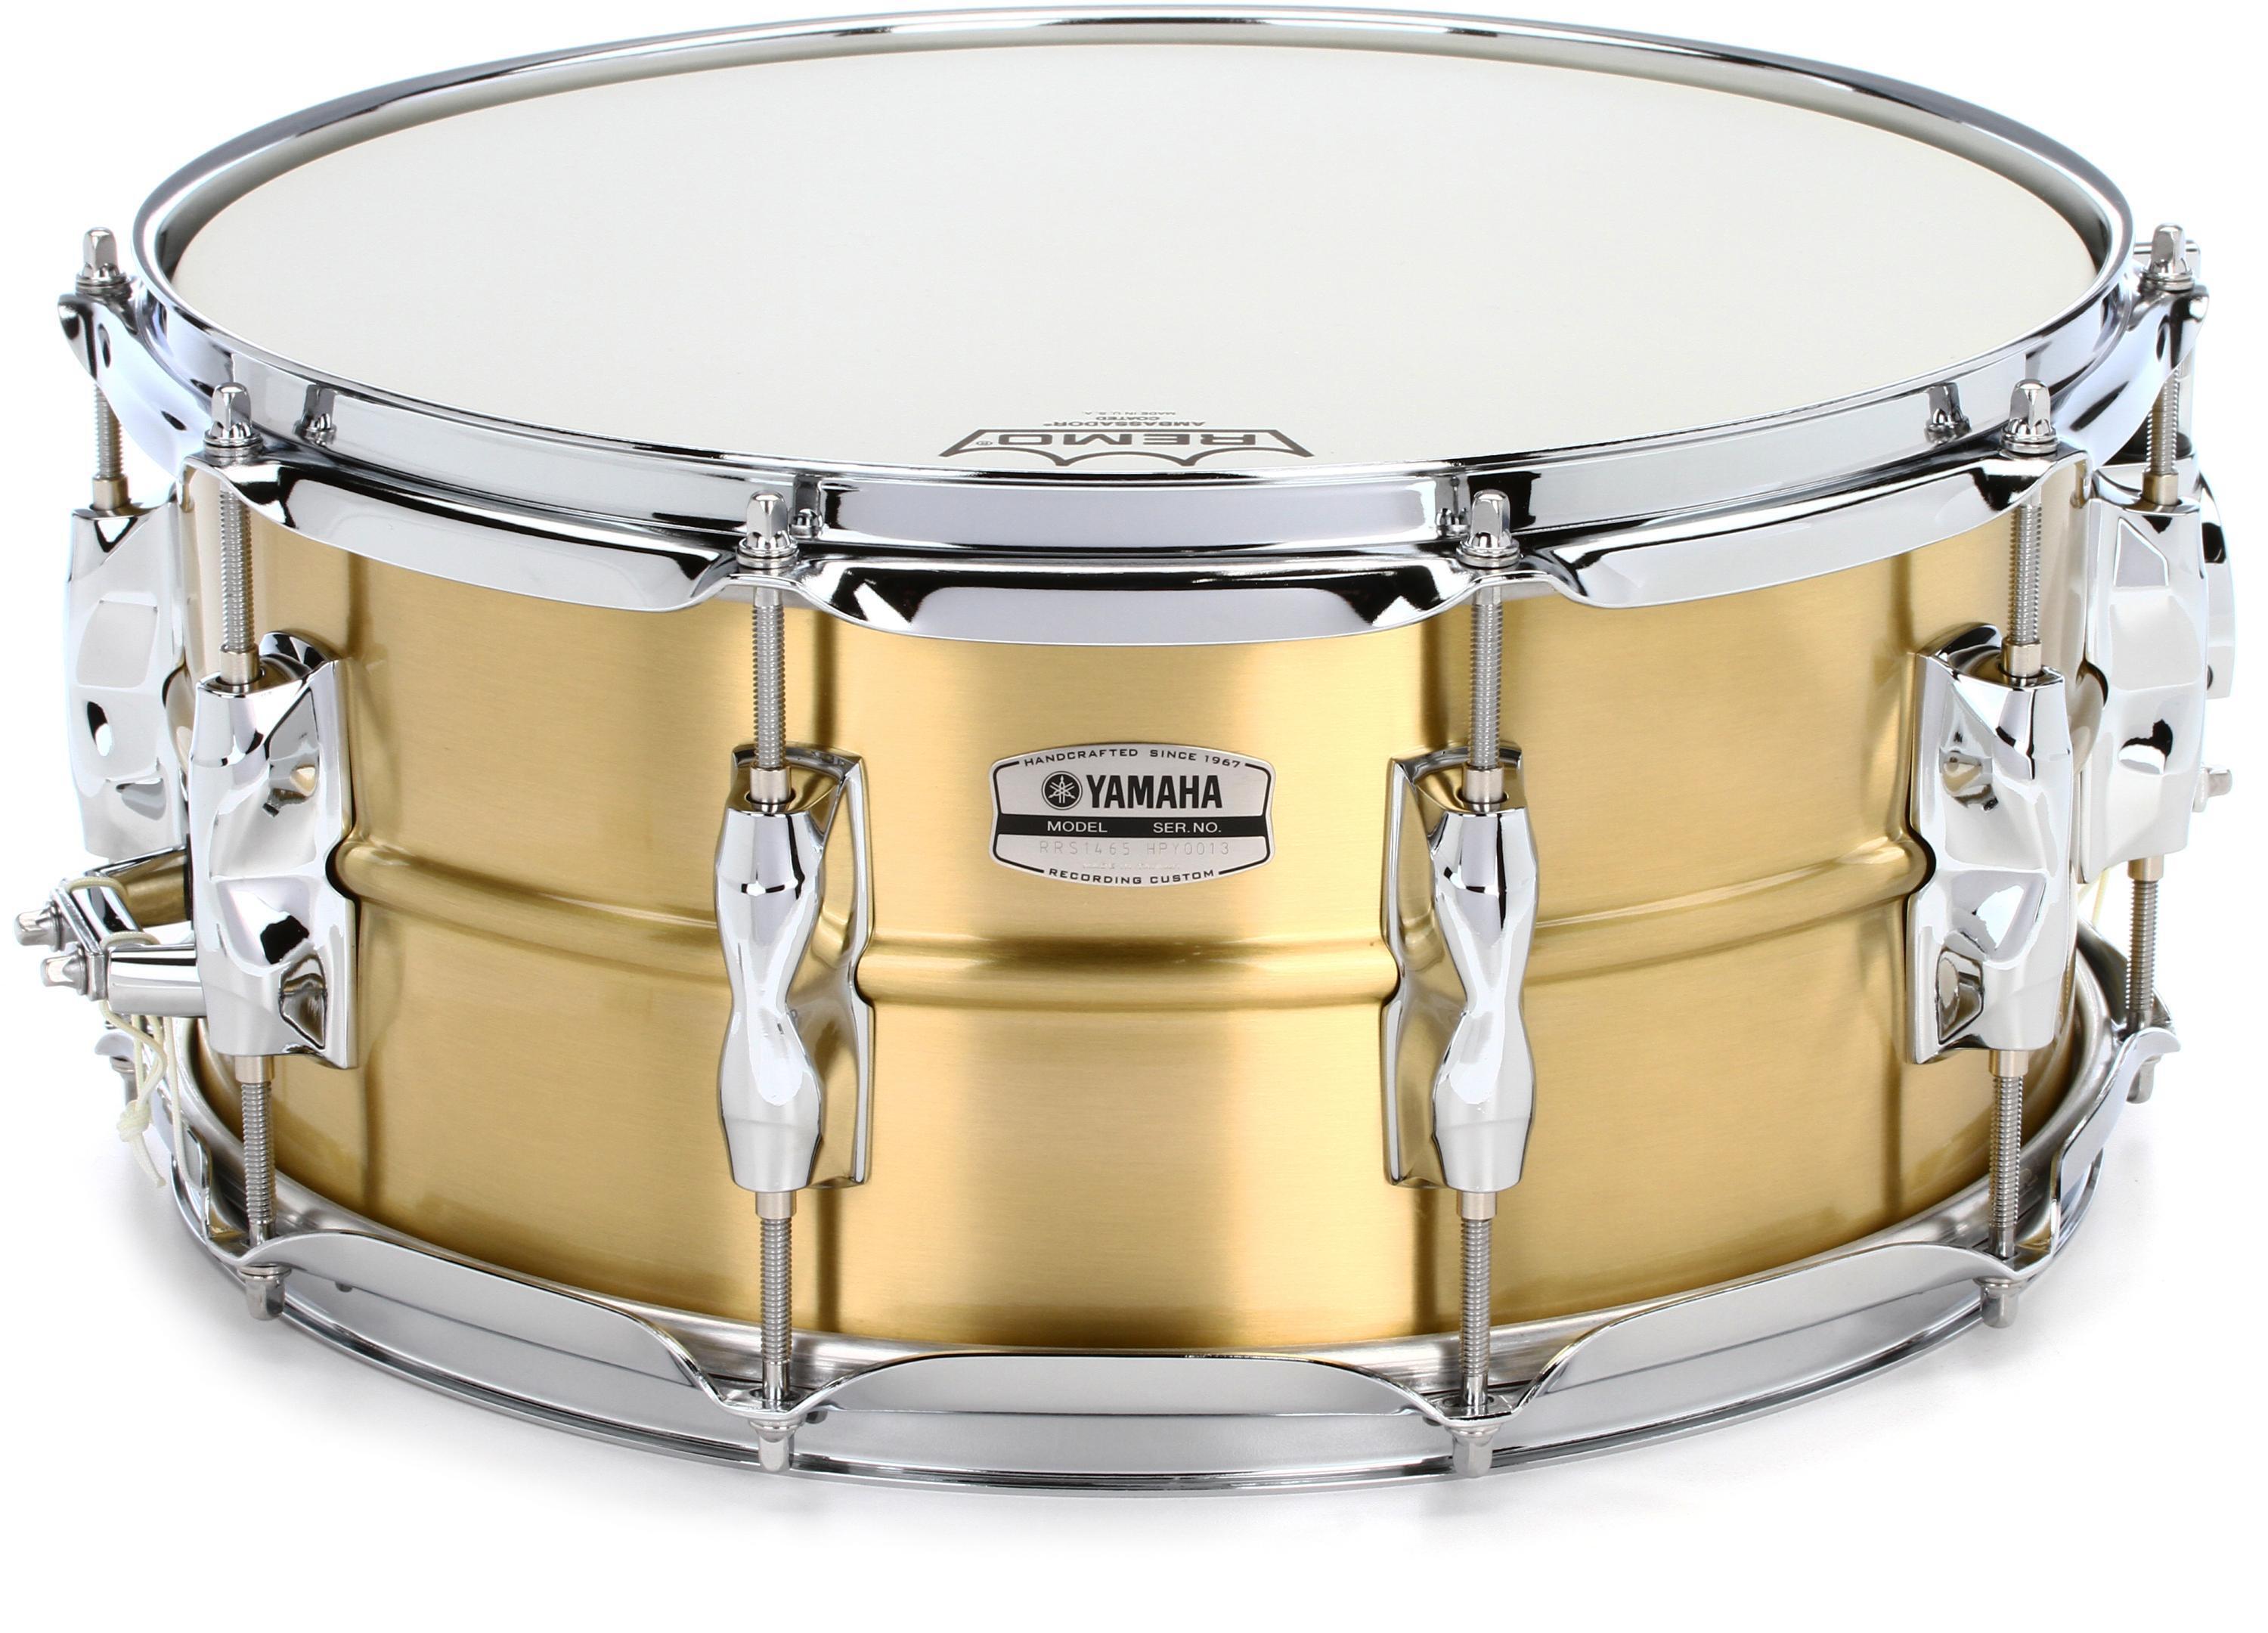 Yamaha Recording Custom Brass Snare Drum - 14 x 6.5 inch | Sweetwater